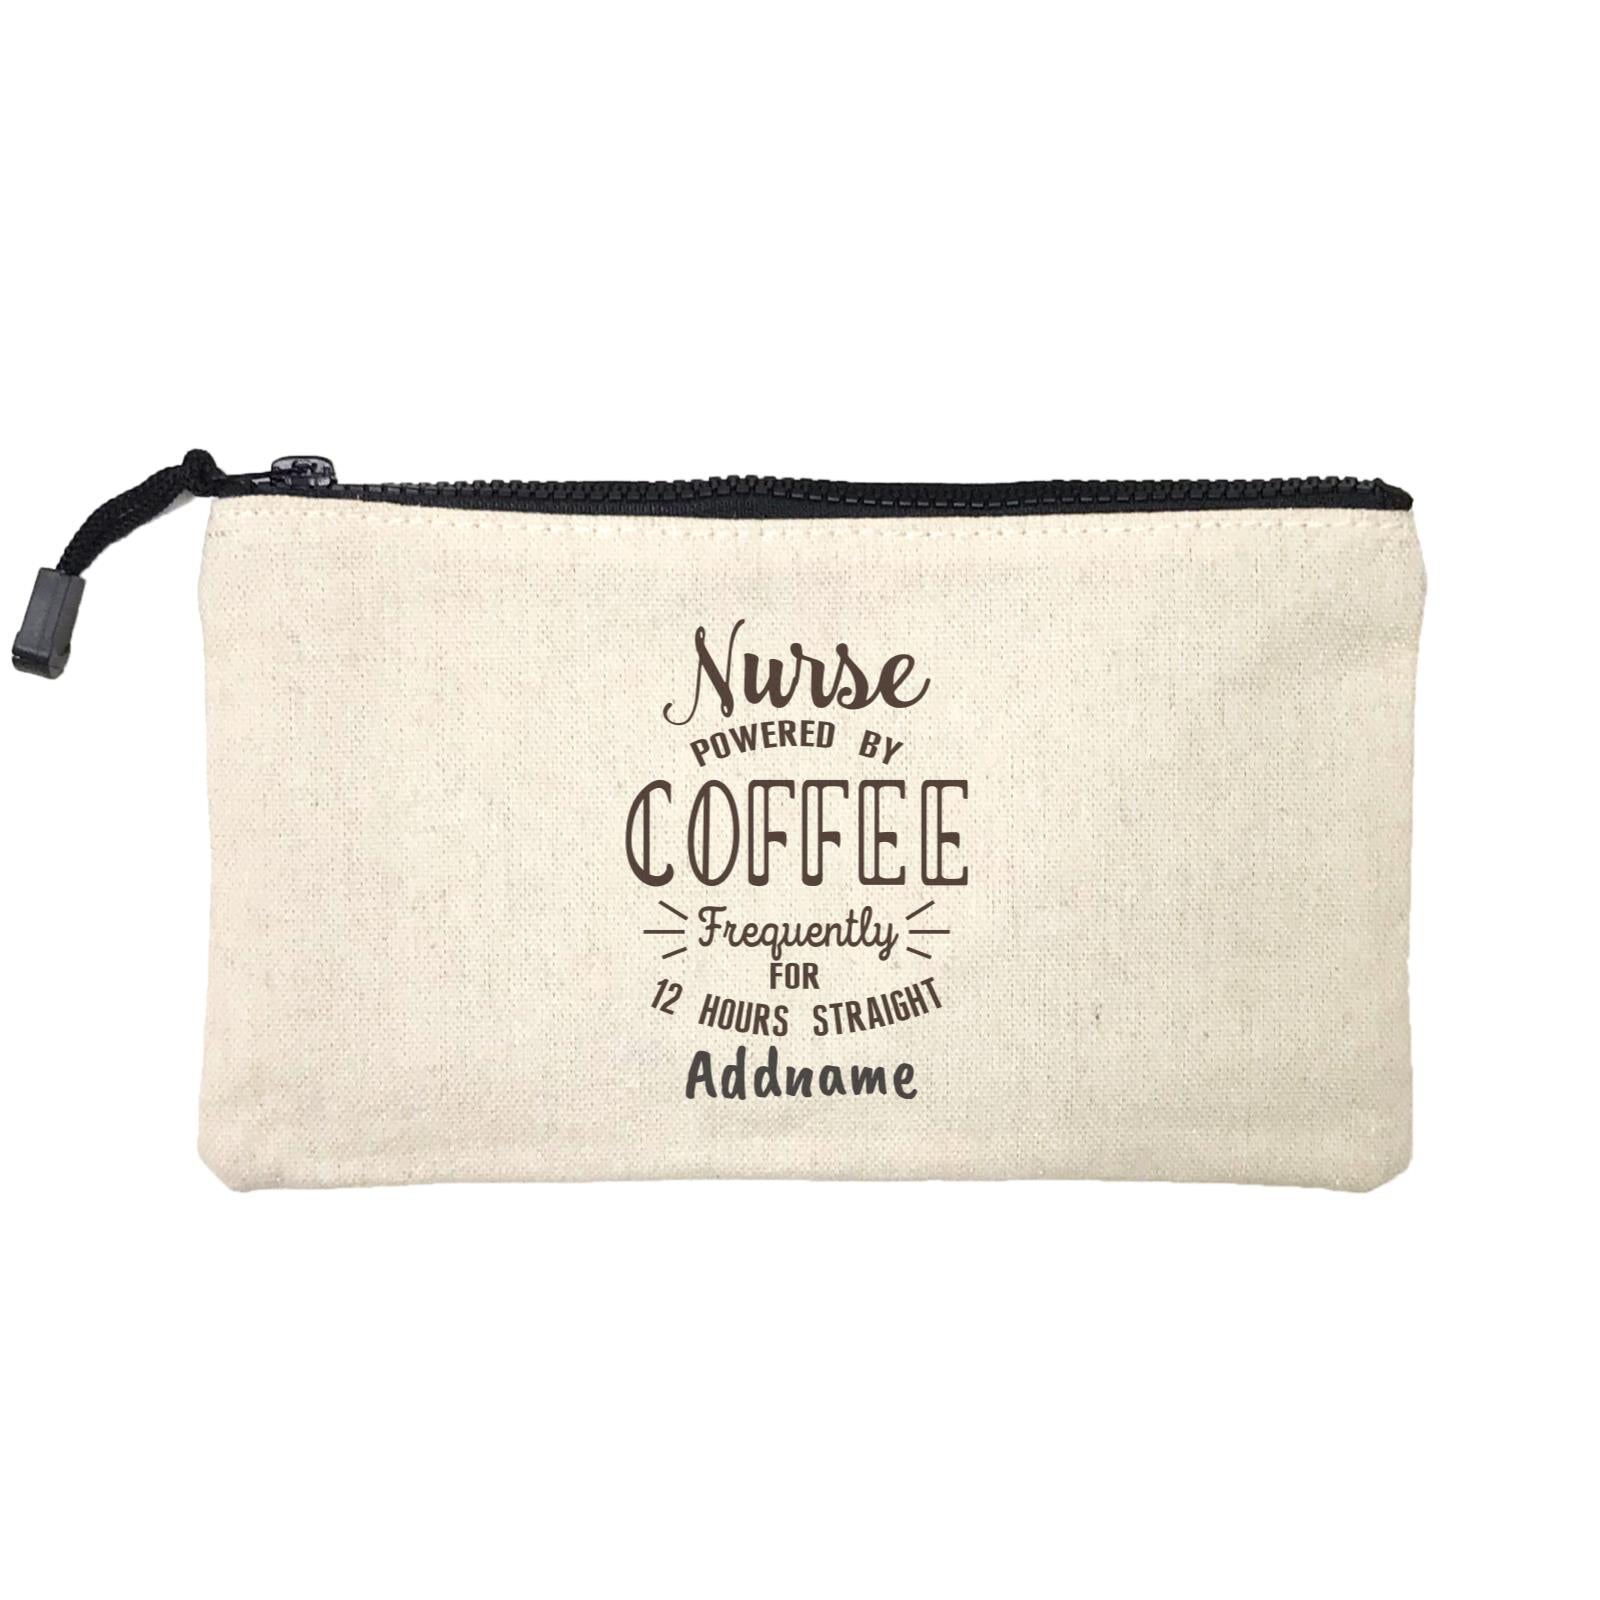 Nurse Powered By Coffee Frequently for 12 Hours Straight Mini Accessories Stationery Pouch